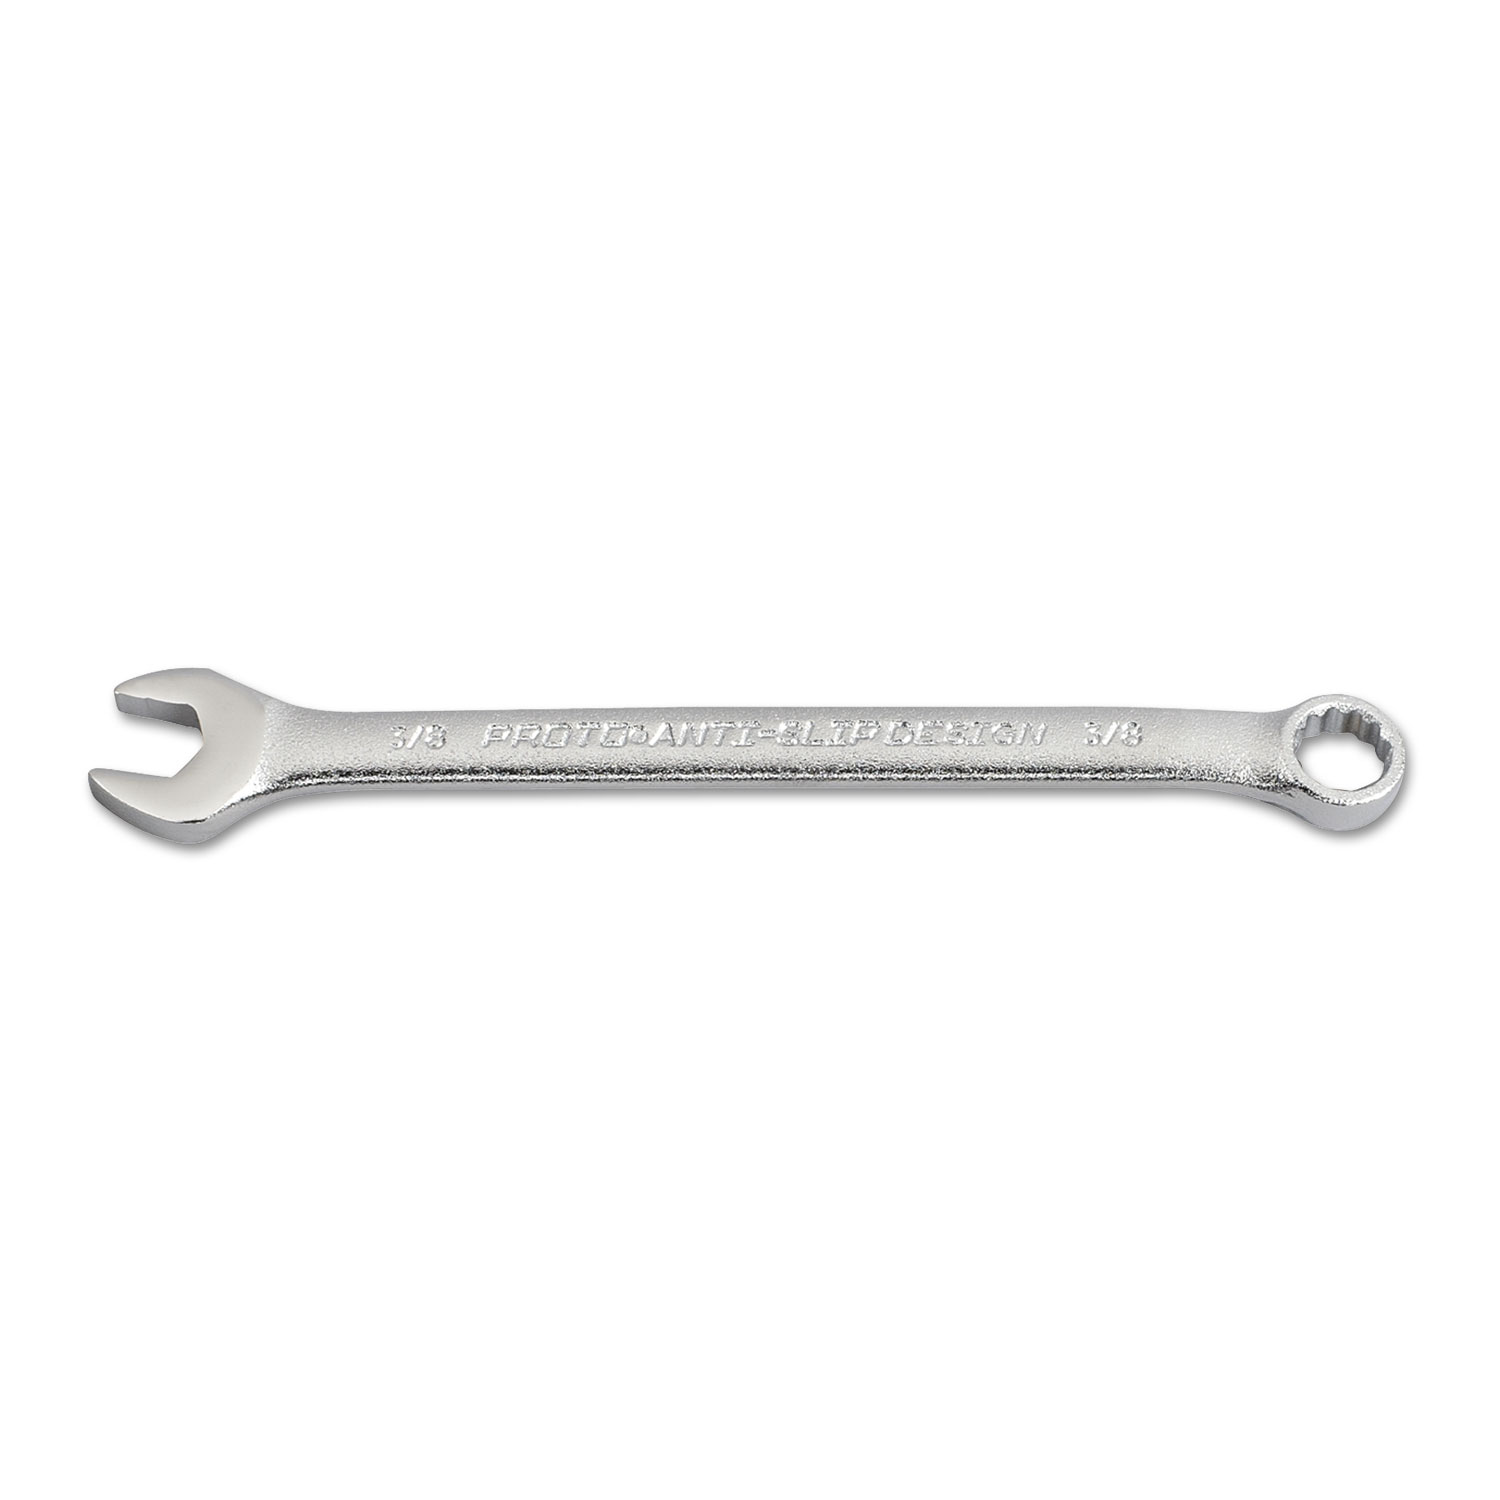 Torqueplus 12-Point Combination Wrench, 3/8 Opening, Satin Finish